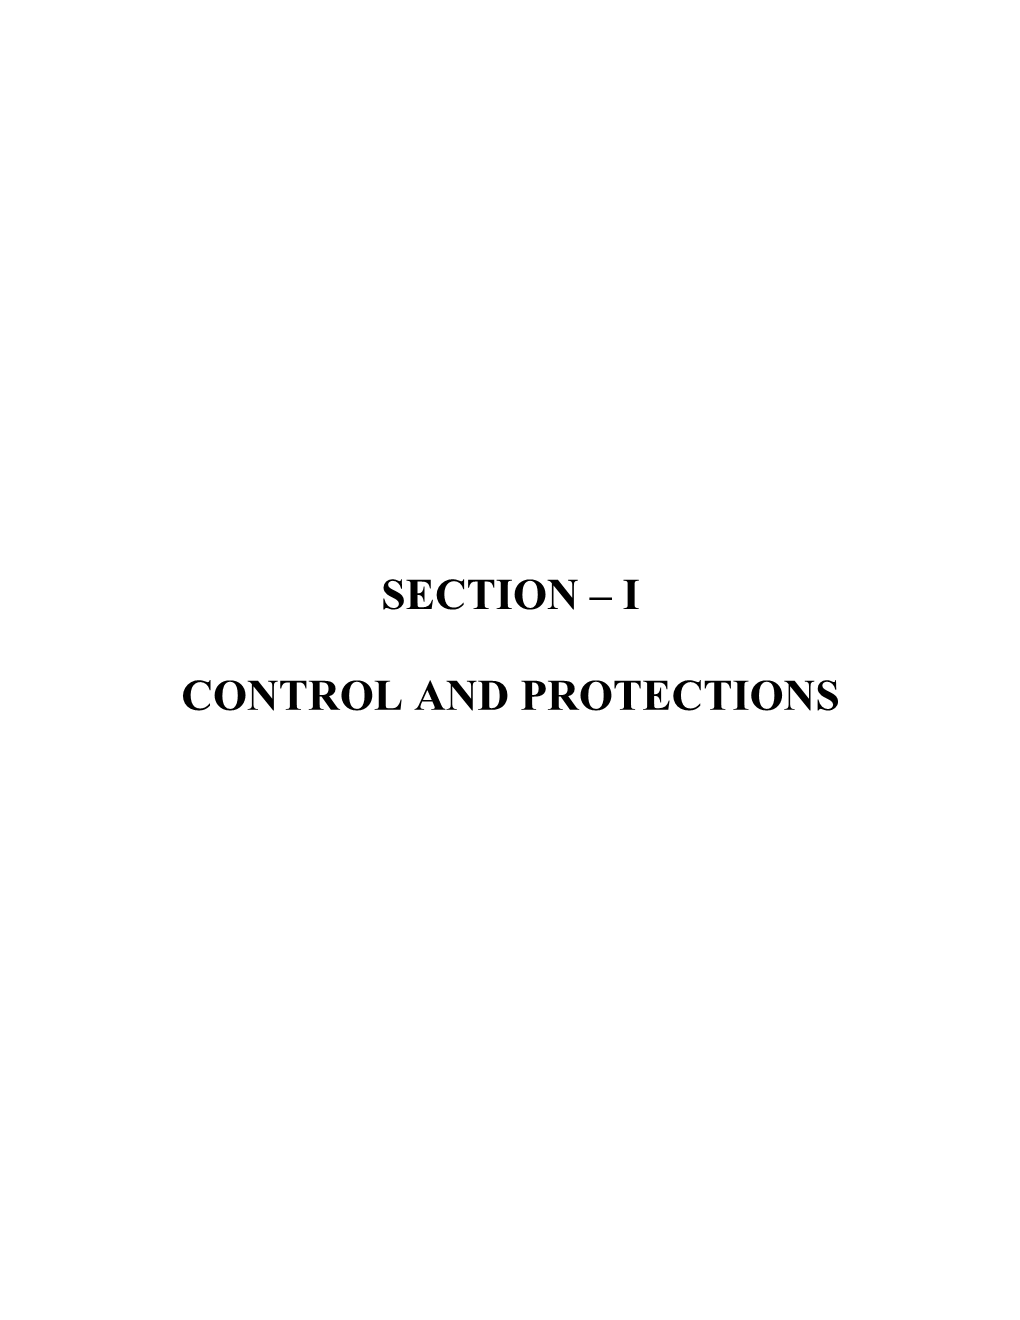 Chapter-1: Control and Protection General Considerations, Technology Development